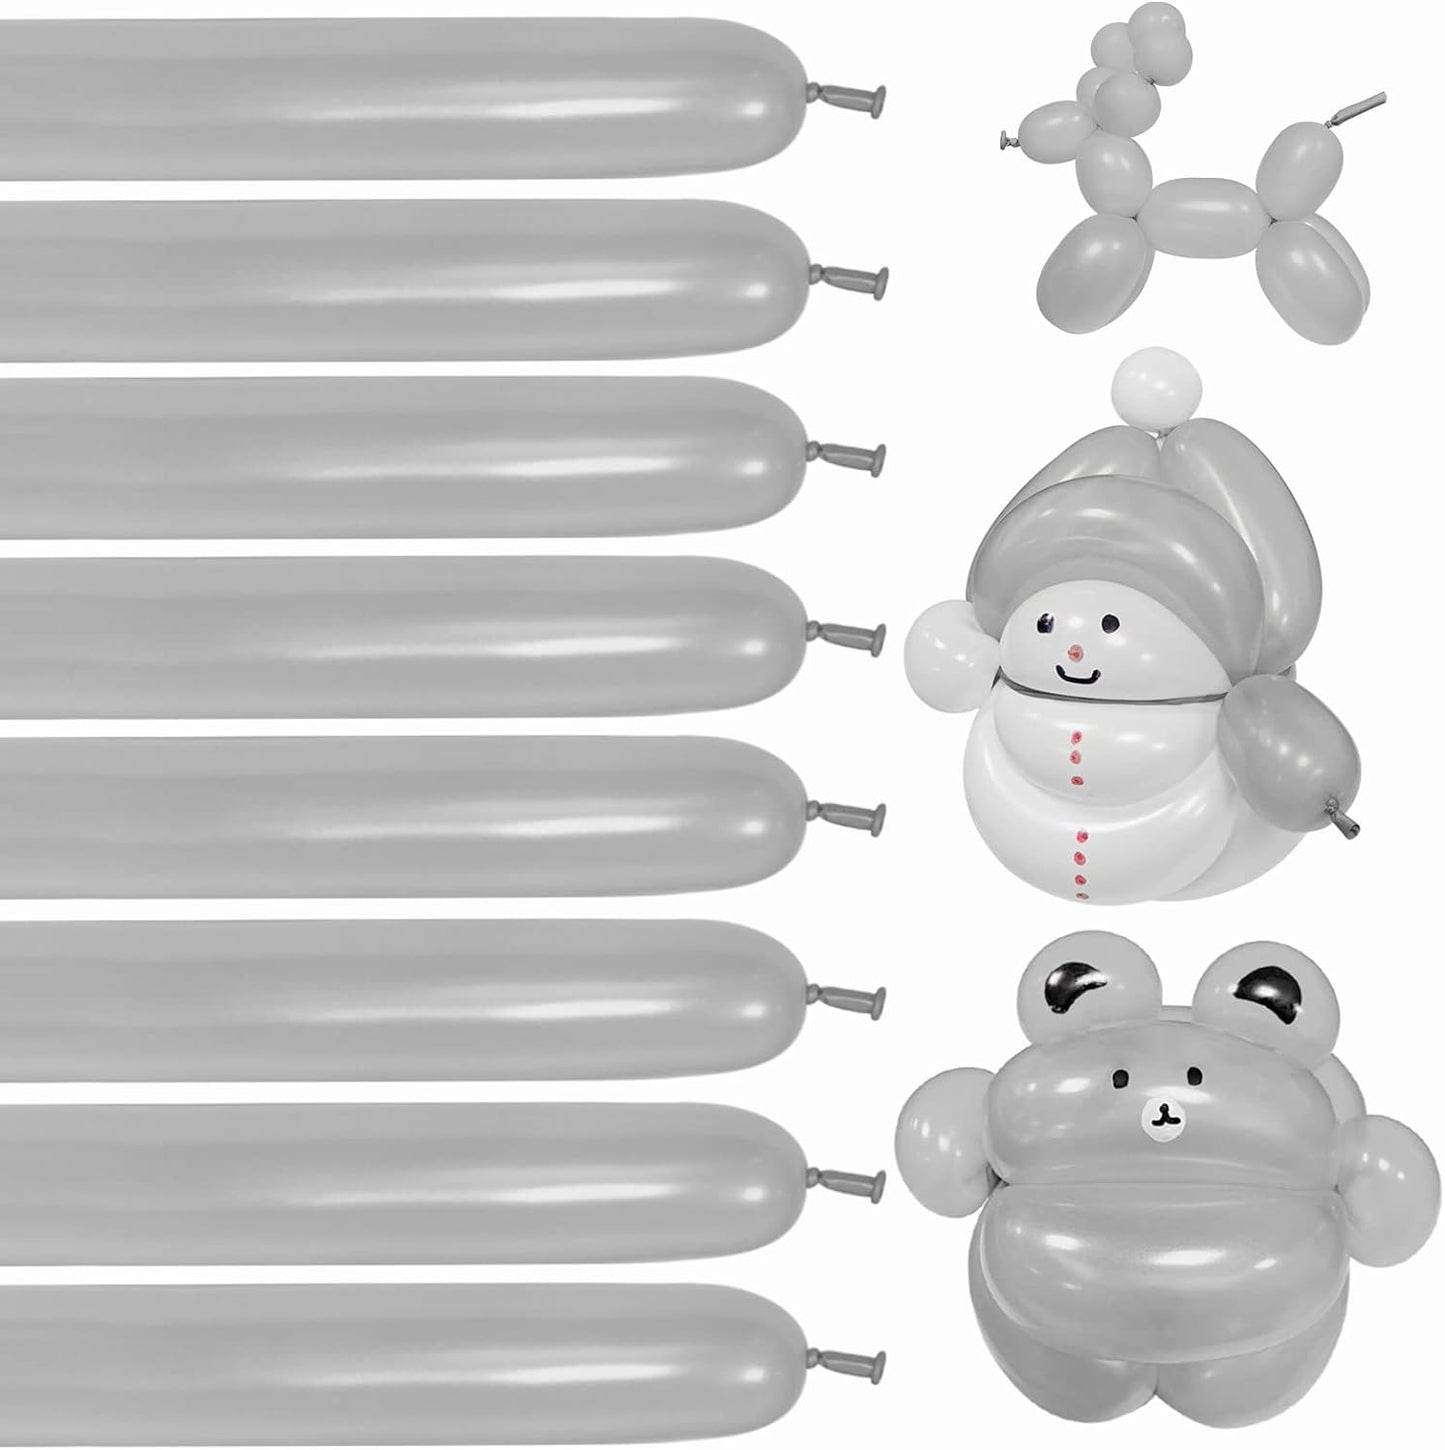 100Pcs Clear 260 Balloons Clear Long Skinny Latex Balloons for Animal Balloons, Premium Quality Balloons for Beginners Balloons Making Kid'S Carnivals Party Decoartion